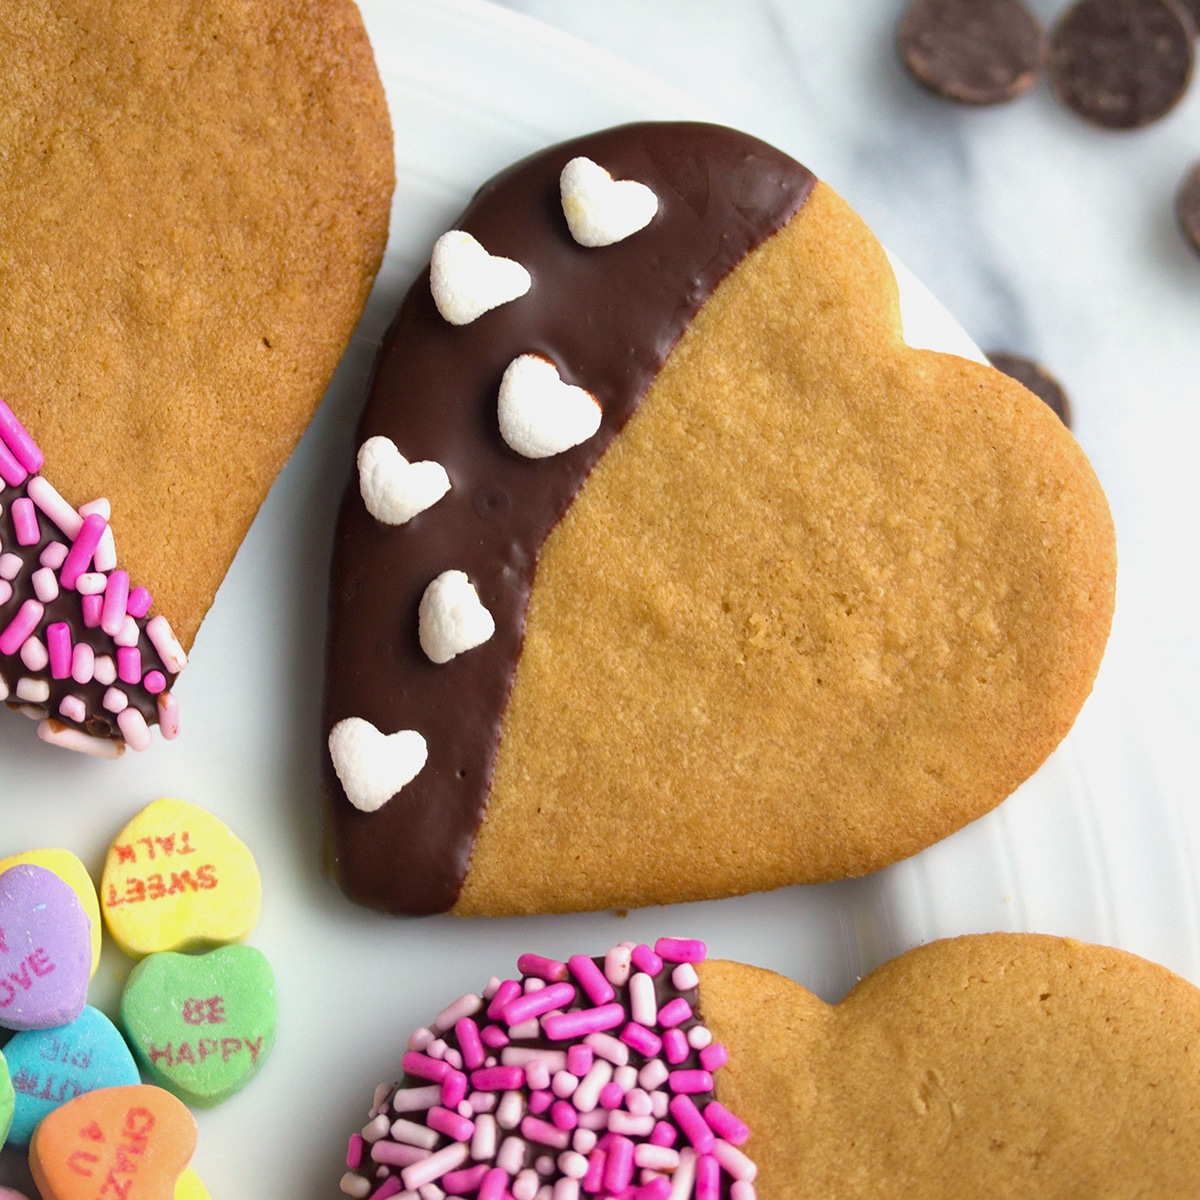 Closeup view of heart-shaped peanut butter cookies dipped in chocolate with sprinkles.